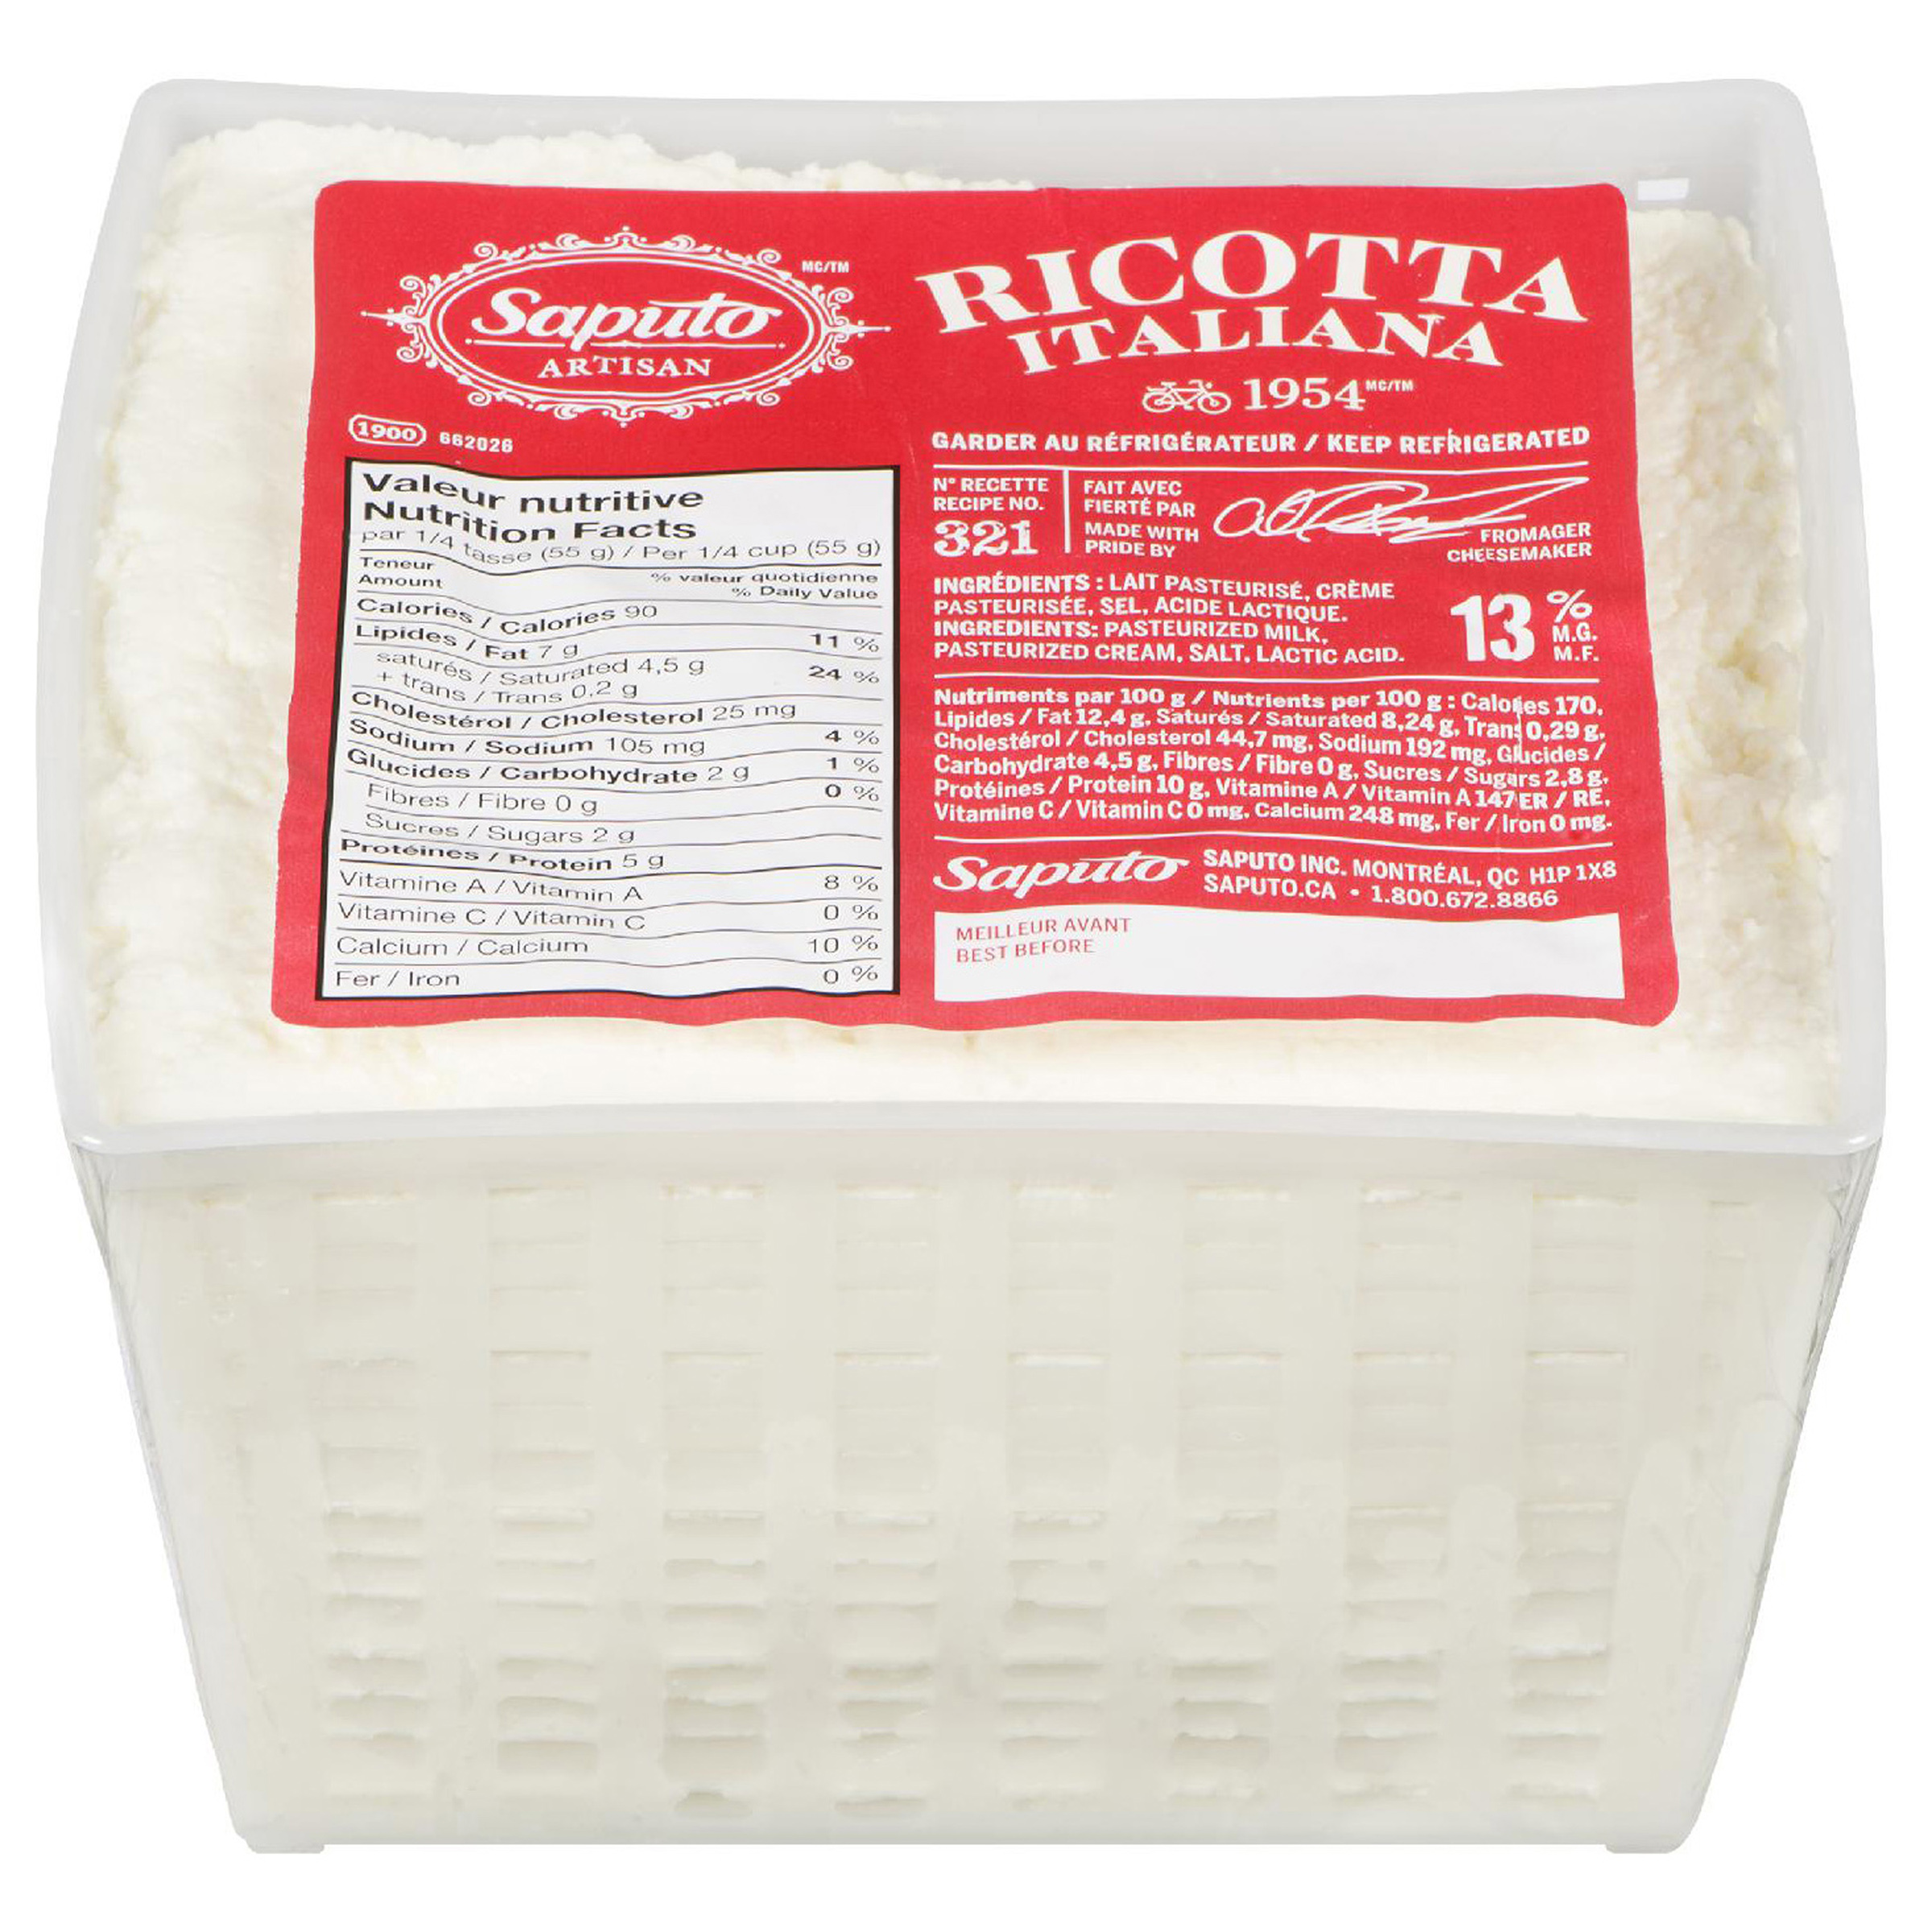 fromage ricotta x kg 2.5 kg